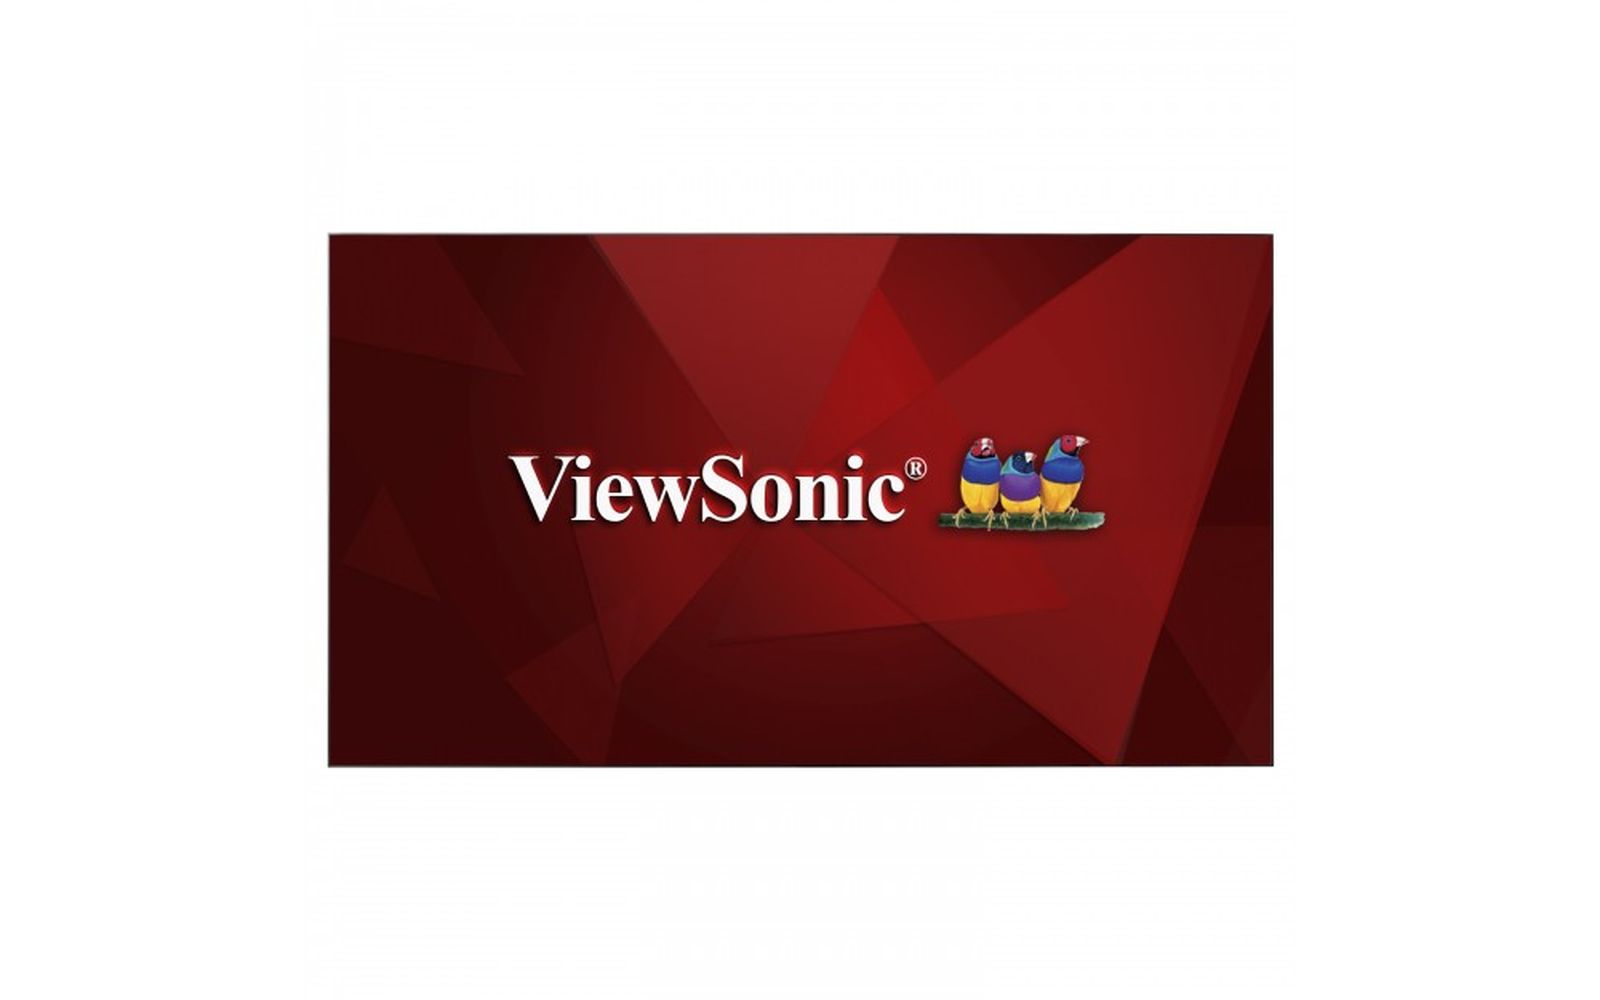 ViewSonic CDX5552-R 55" Ultra-Narrow Bezel Optimized Commercial Display - Certified Refurbished